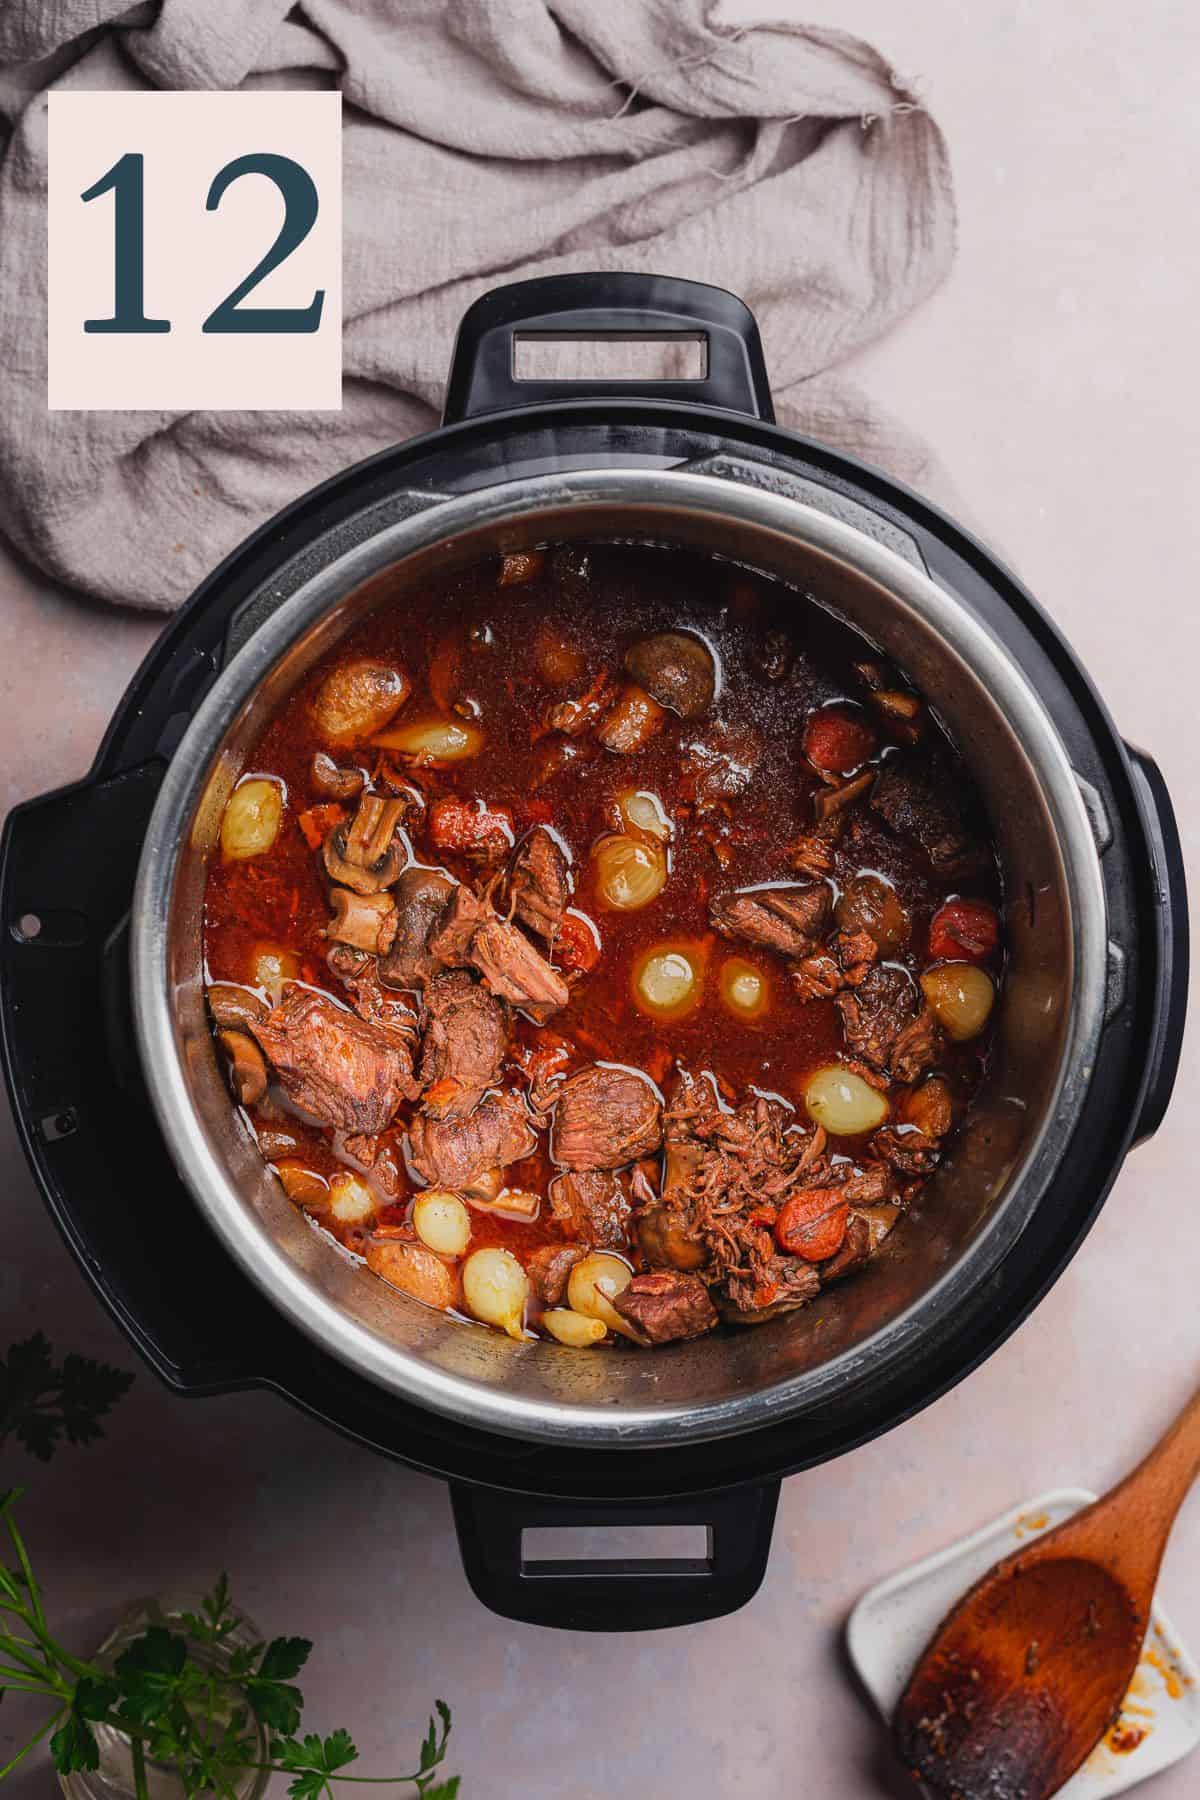 cooked beef bourguignon in a pressure cooker.